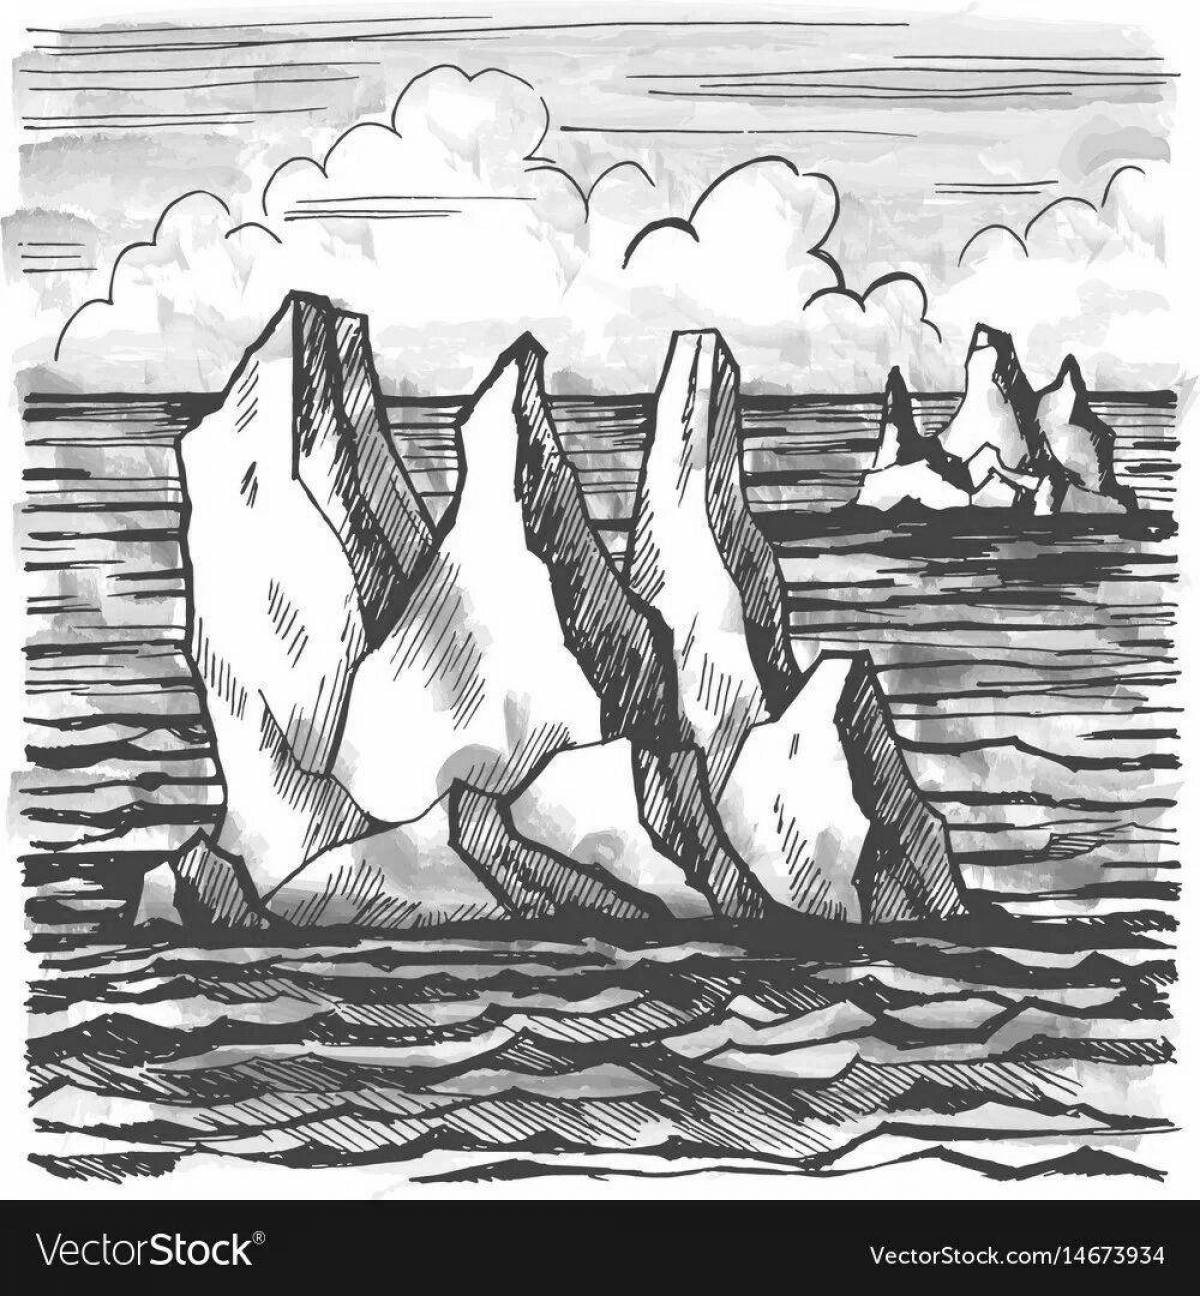 Adorable iceberg coloring book for kids